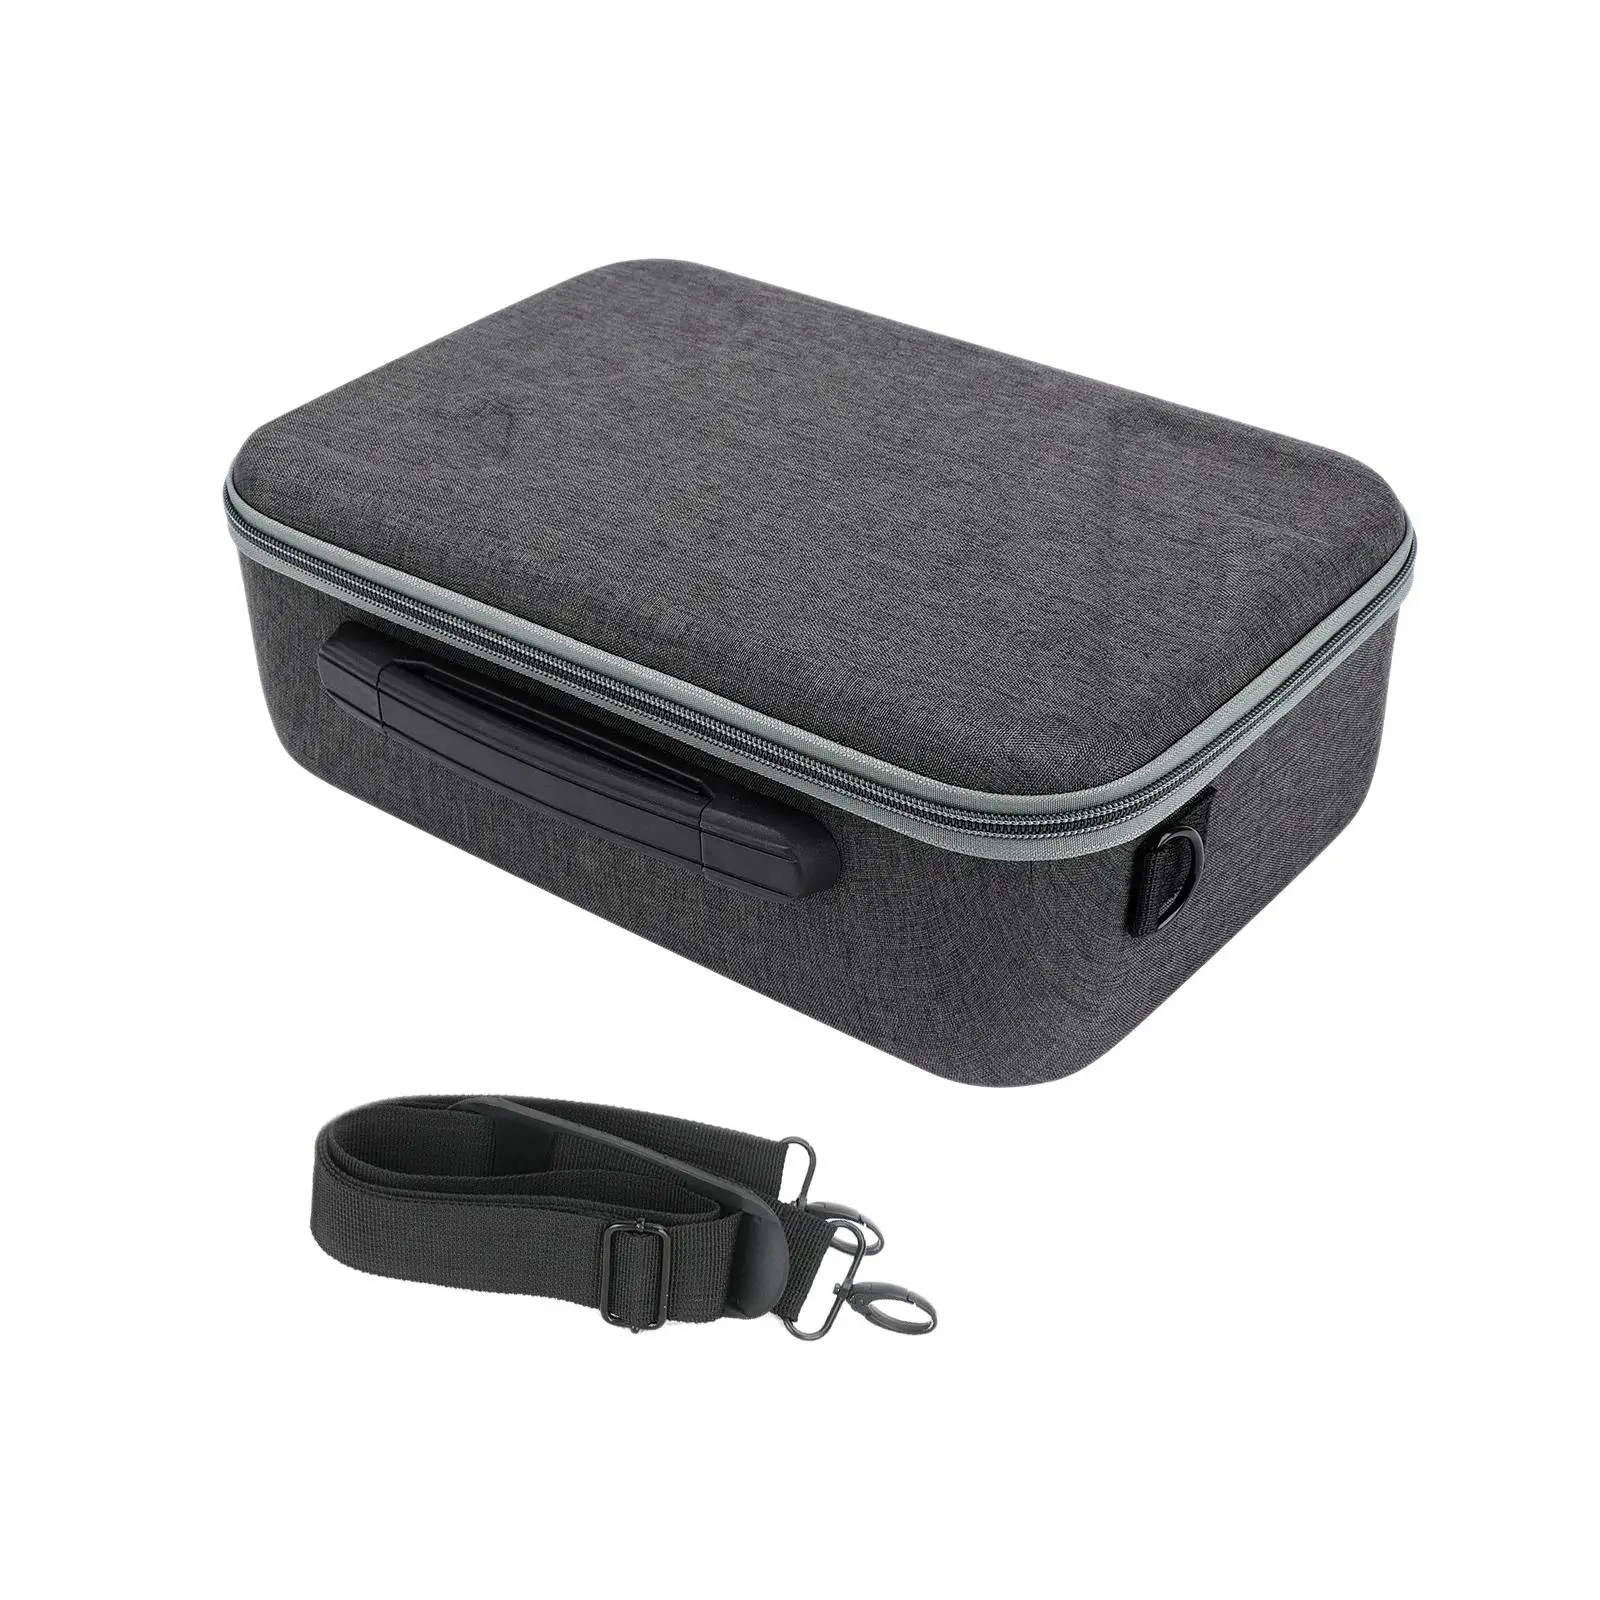 Travel Storage Carrying Case Bag for RS 3 Mini Accessories Color Black with Comfortable Handle